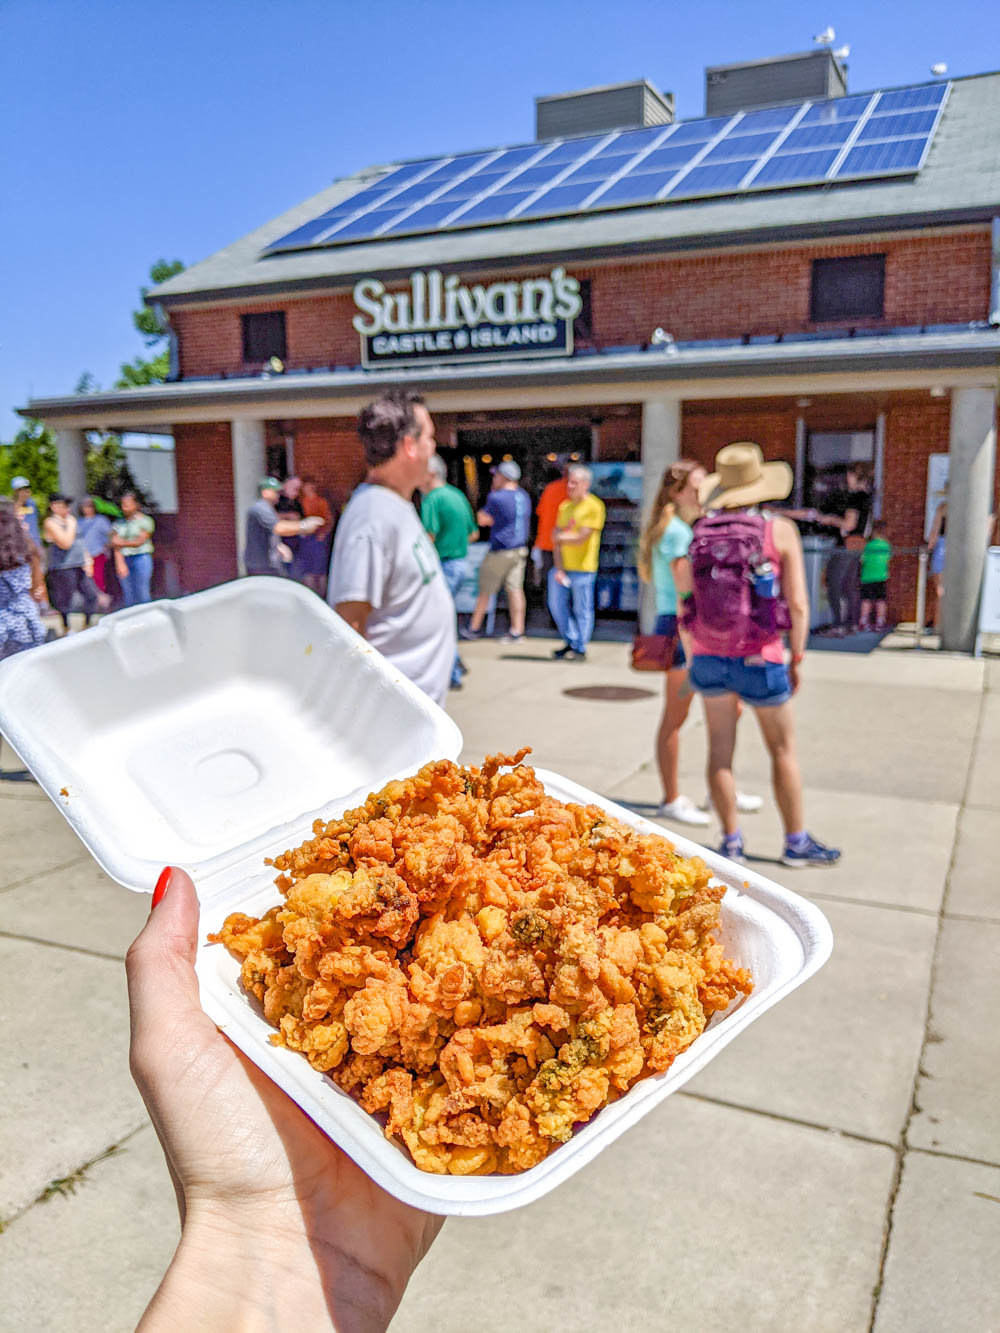 container of fried clams in front of Sullivans on Castle Island - Boston bucket list